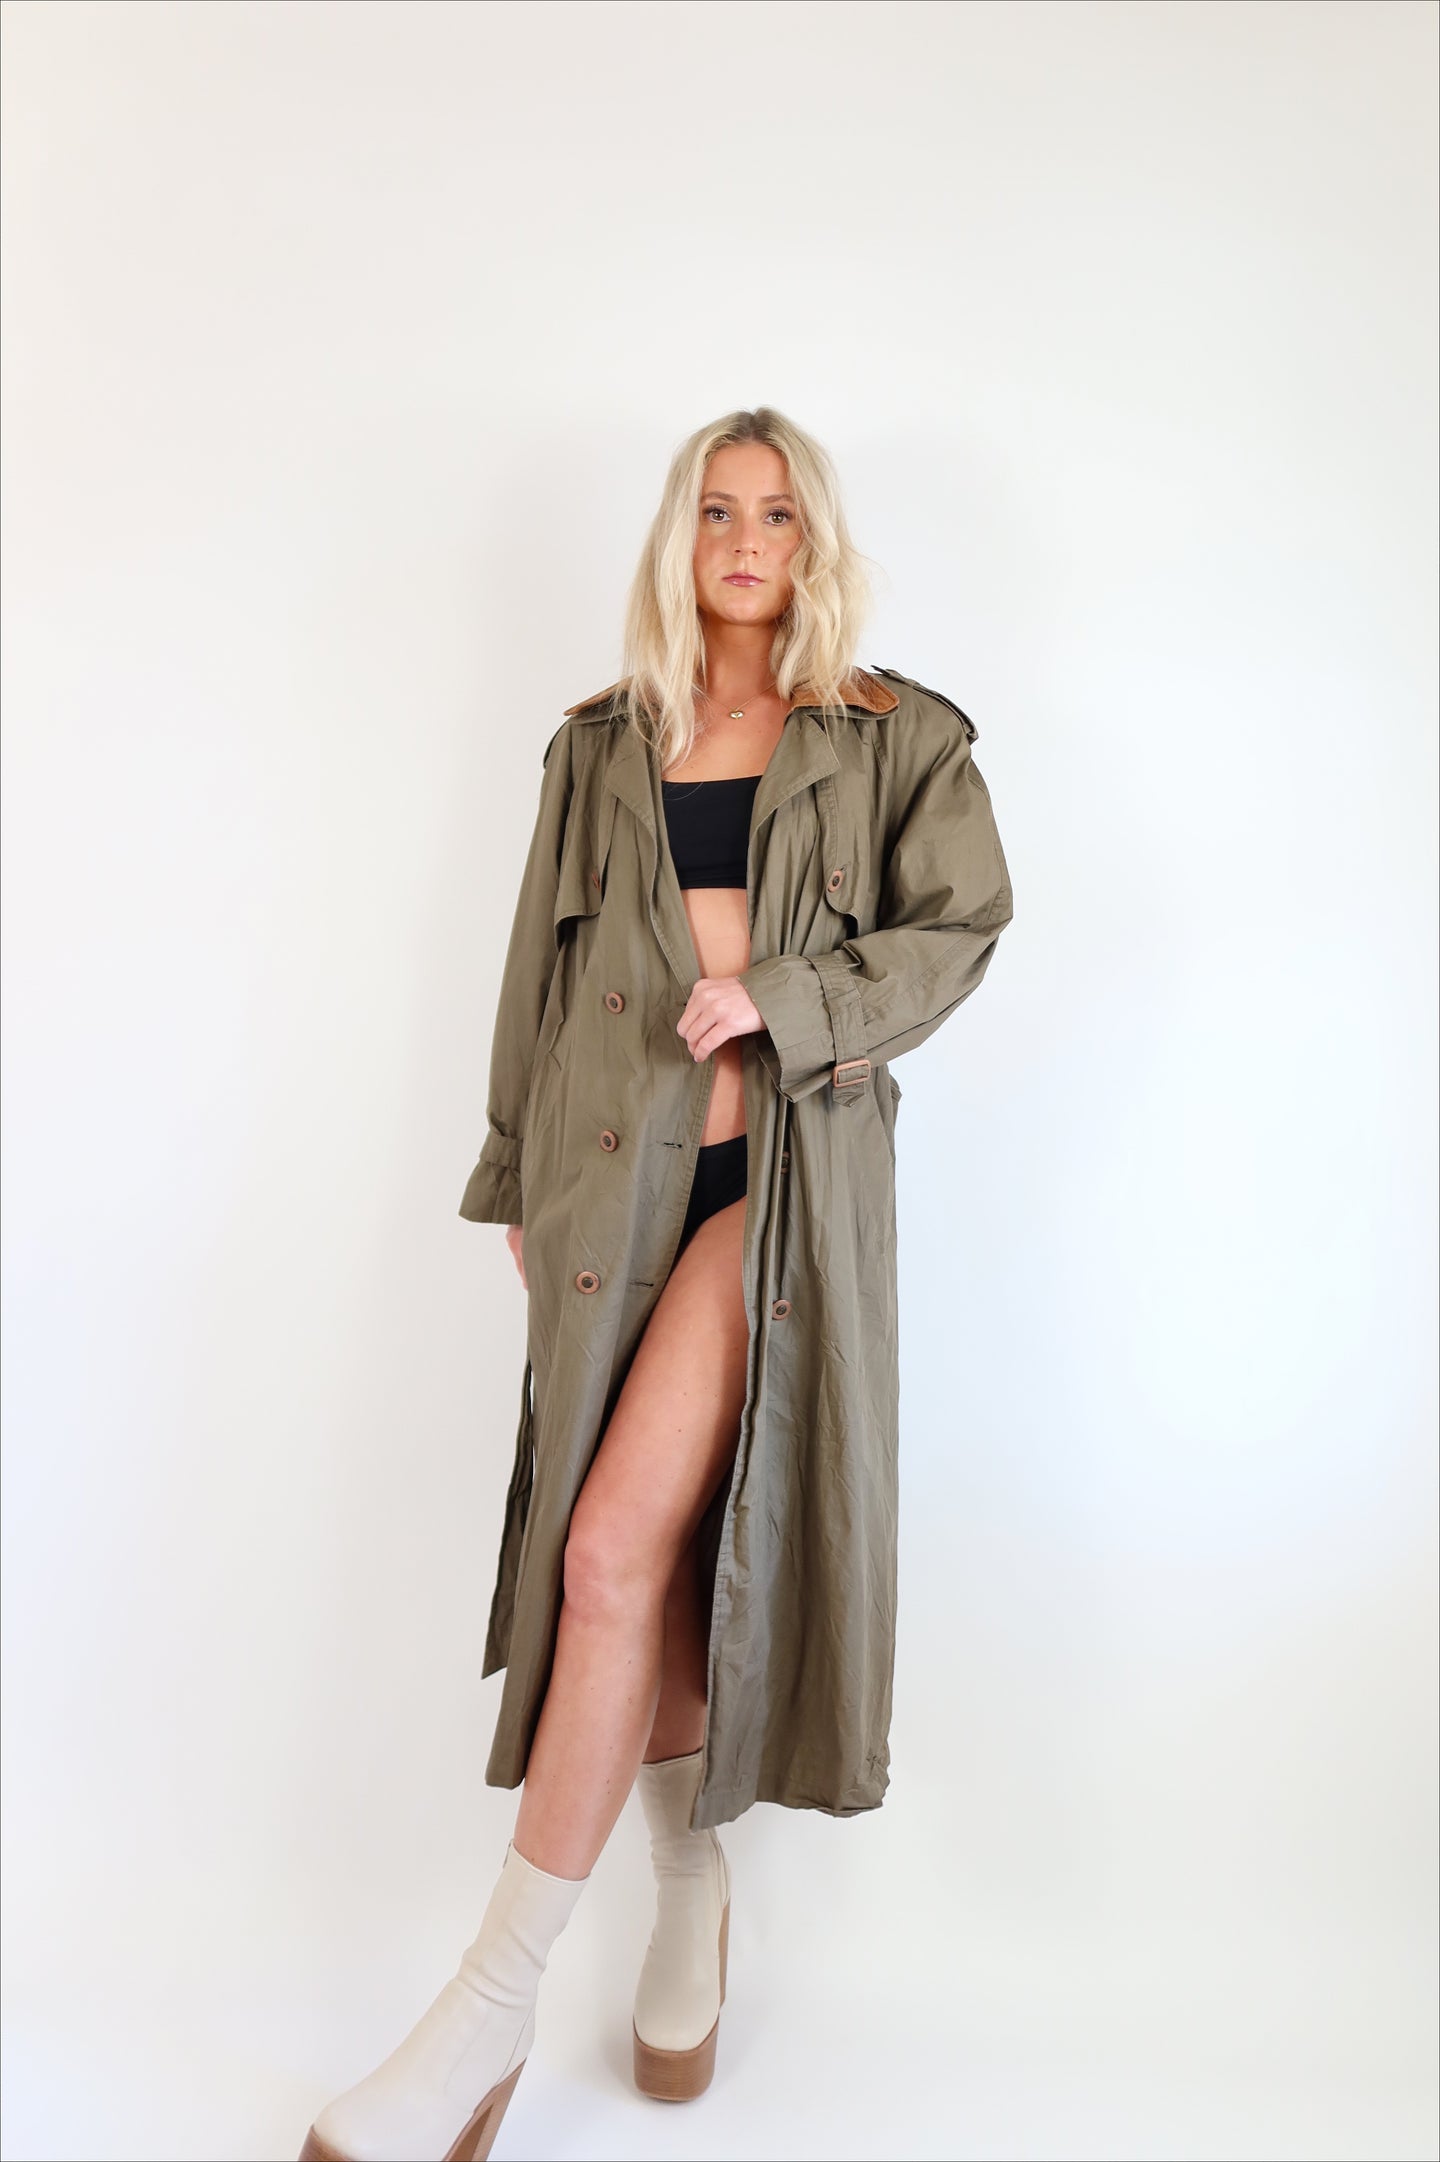 Vintage Olive Cotton Trench with Leather Detail